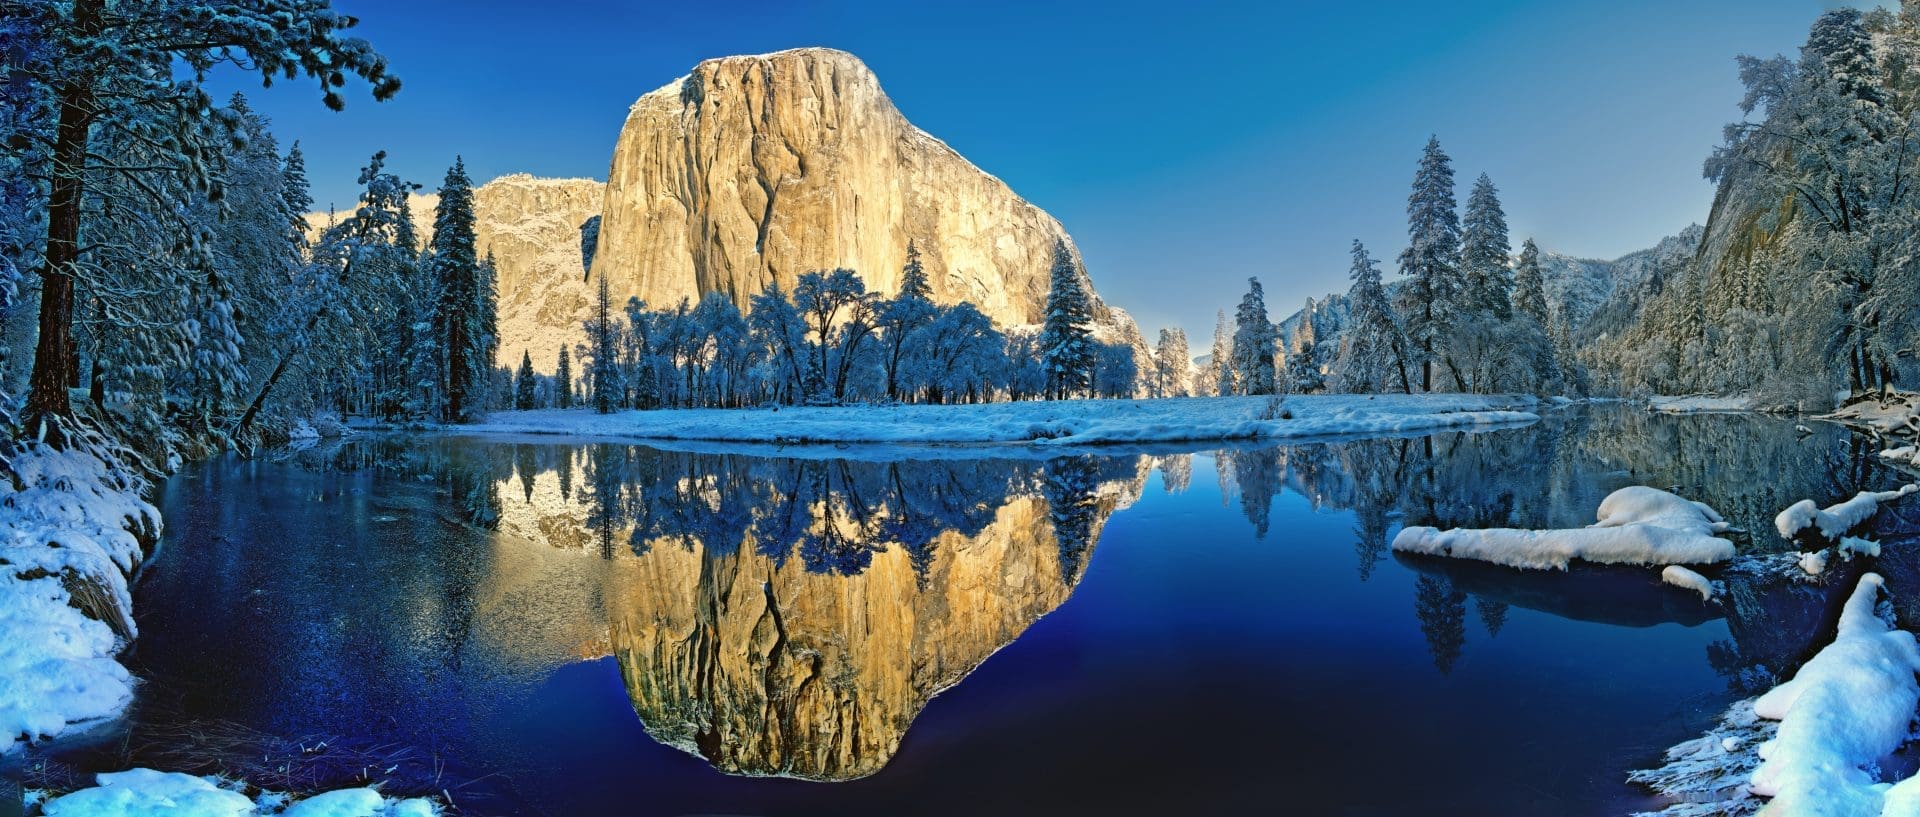 When Does it Snow in Yosemite?